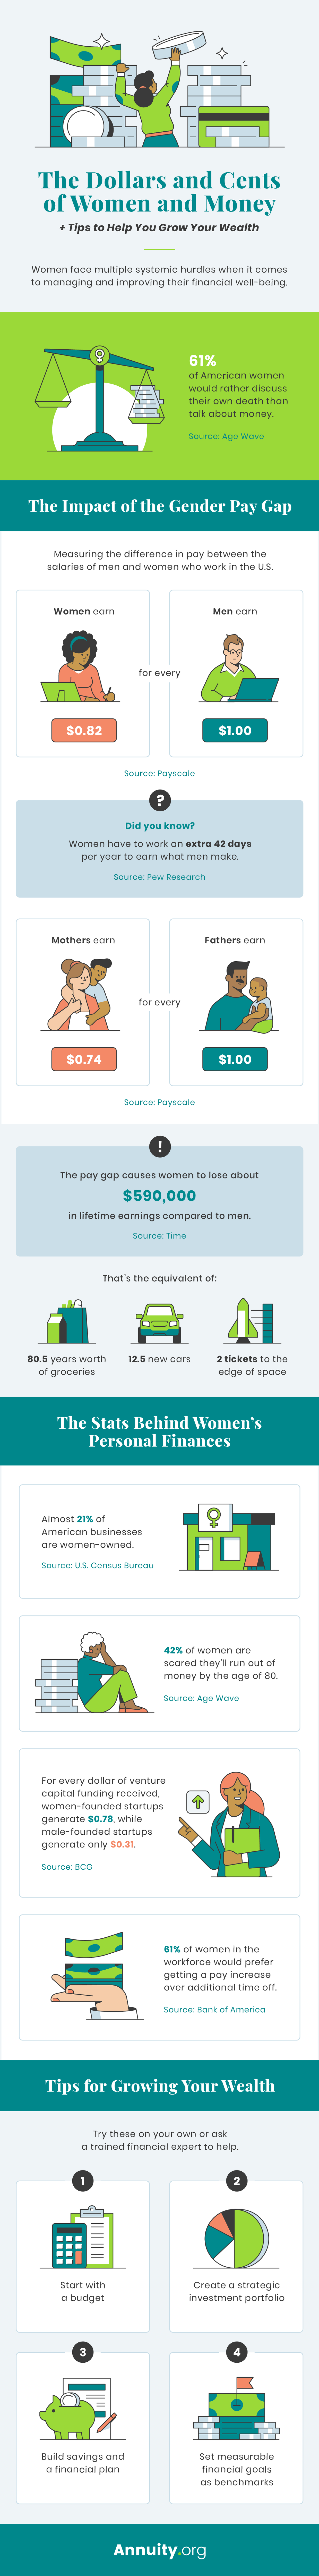 The Dollars and Cents of Women and Money